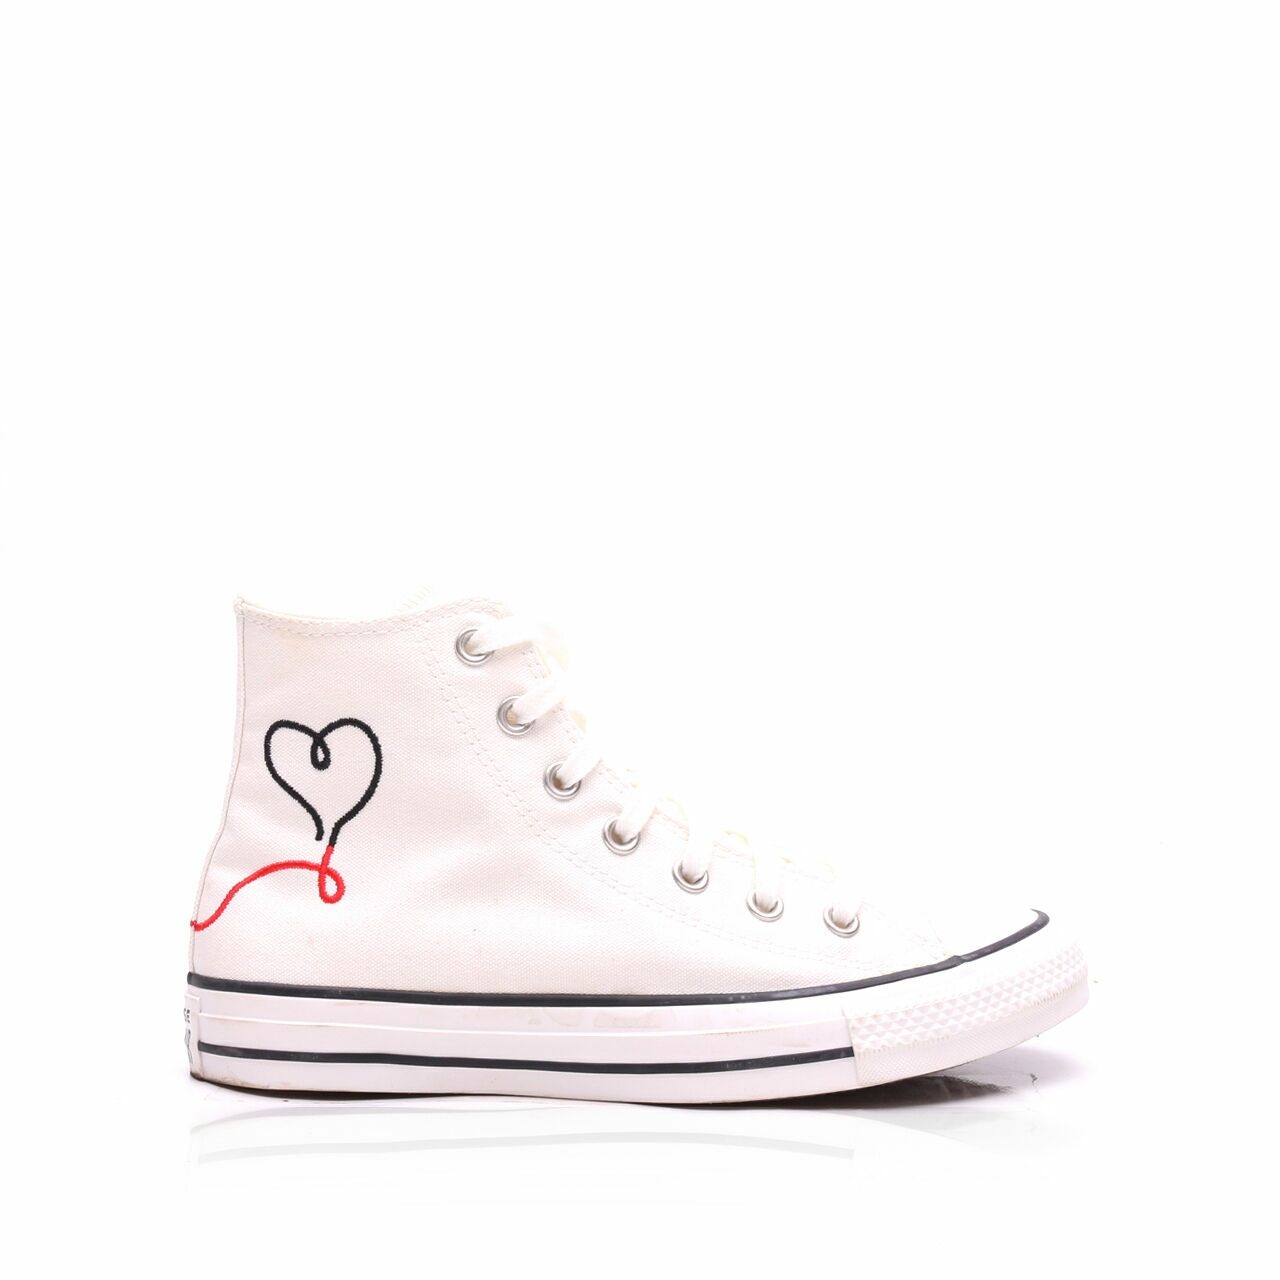 Converse Valentine's Day Chuck Taylor All Star - Hi - Vintage White Sneakers